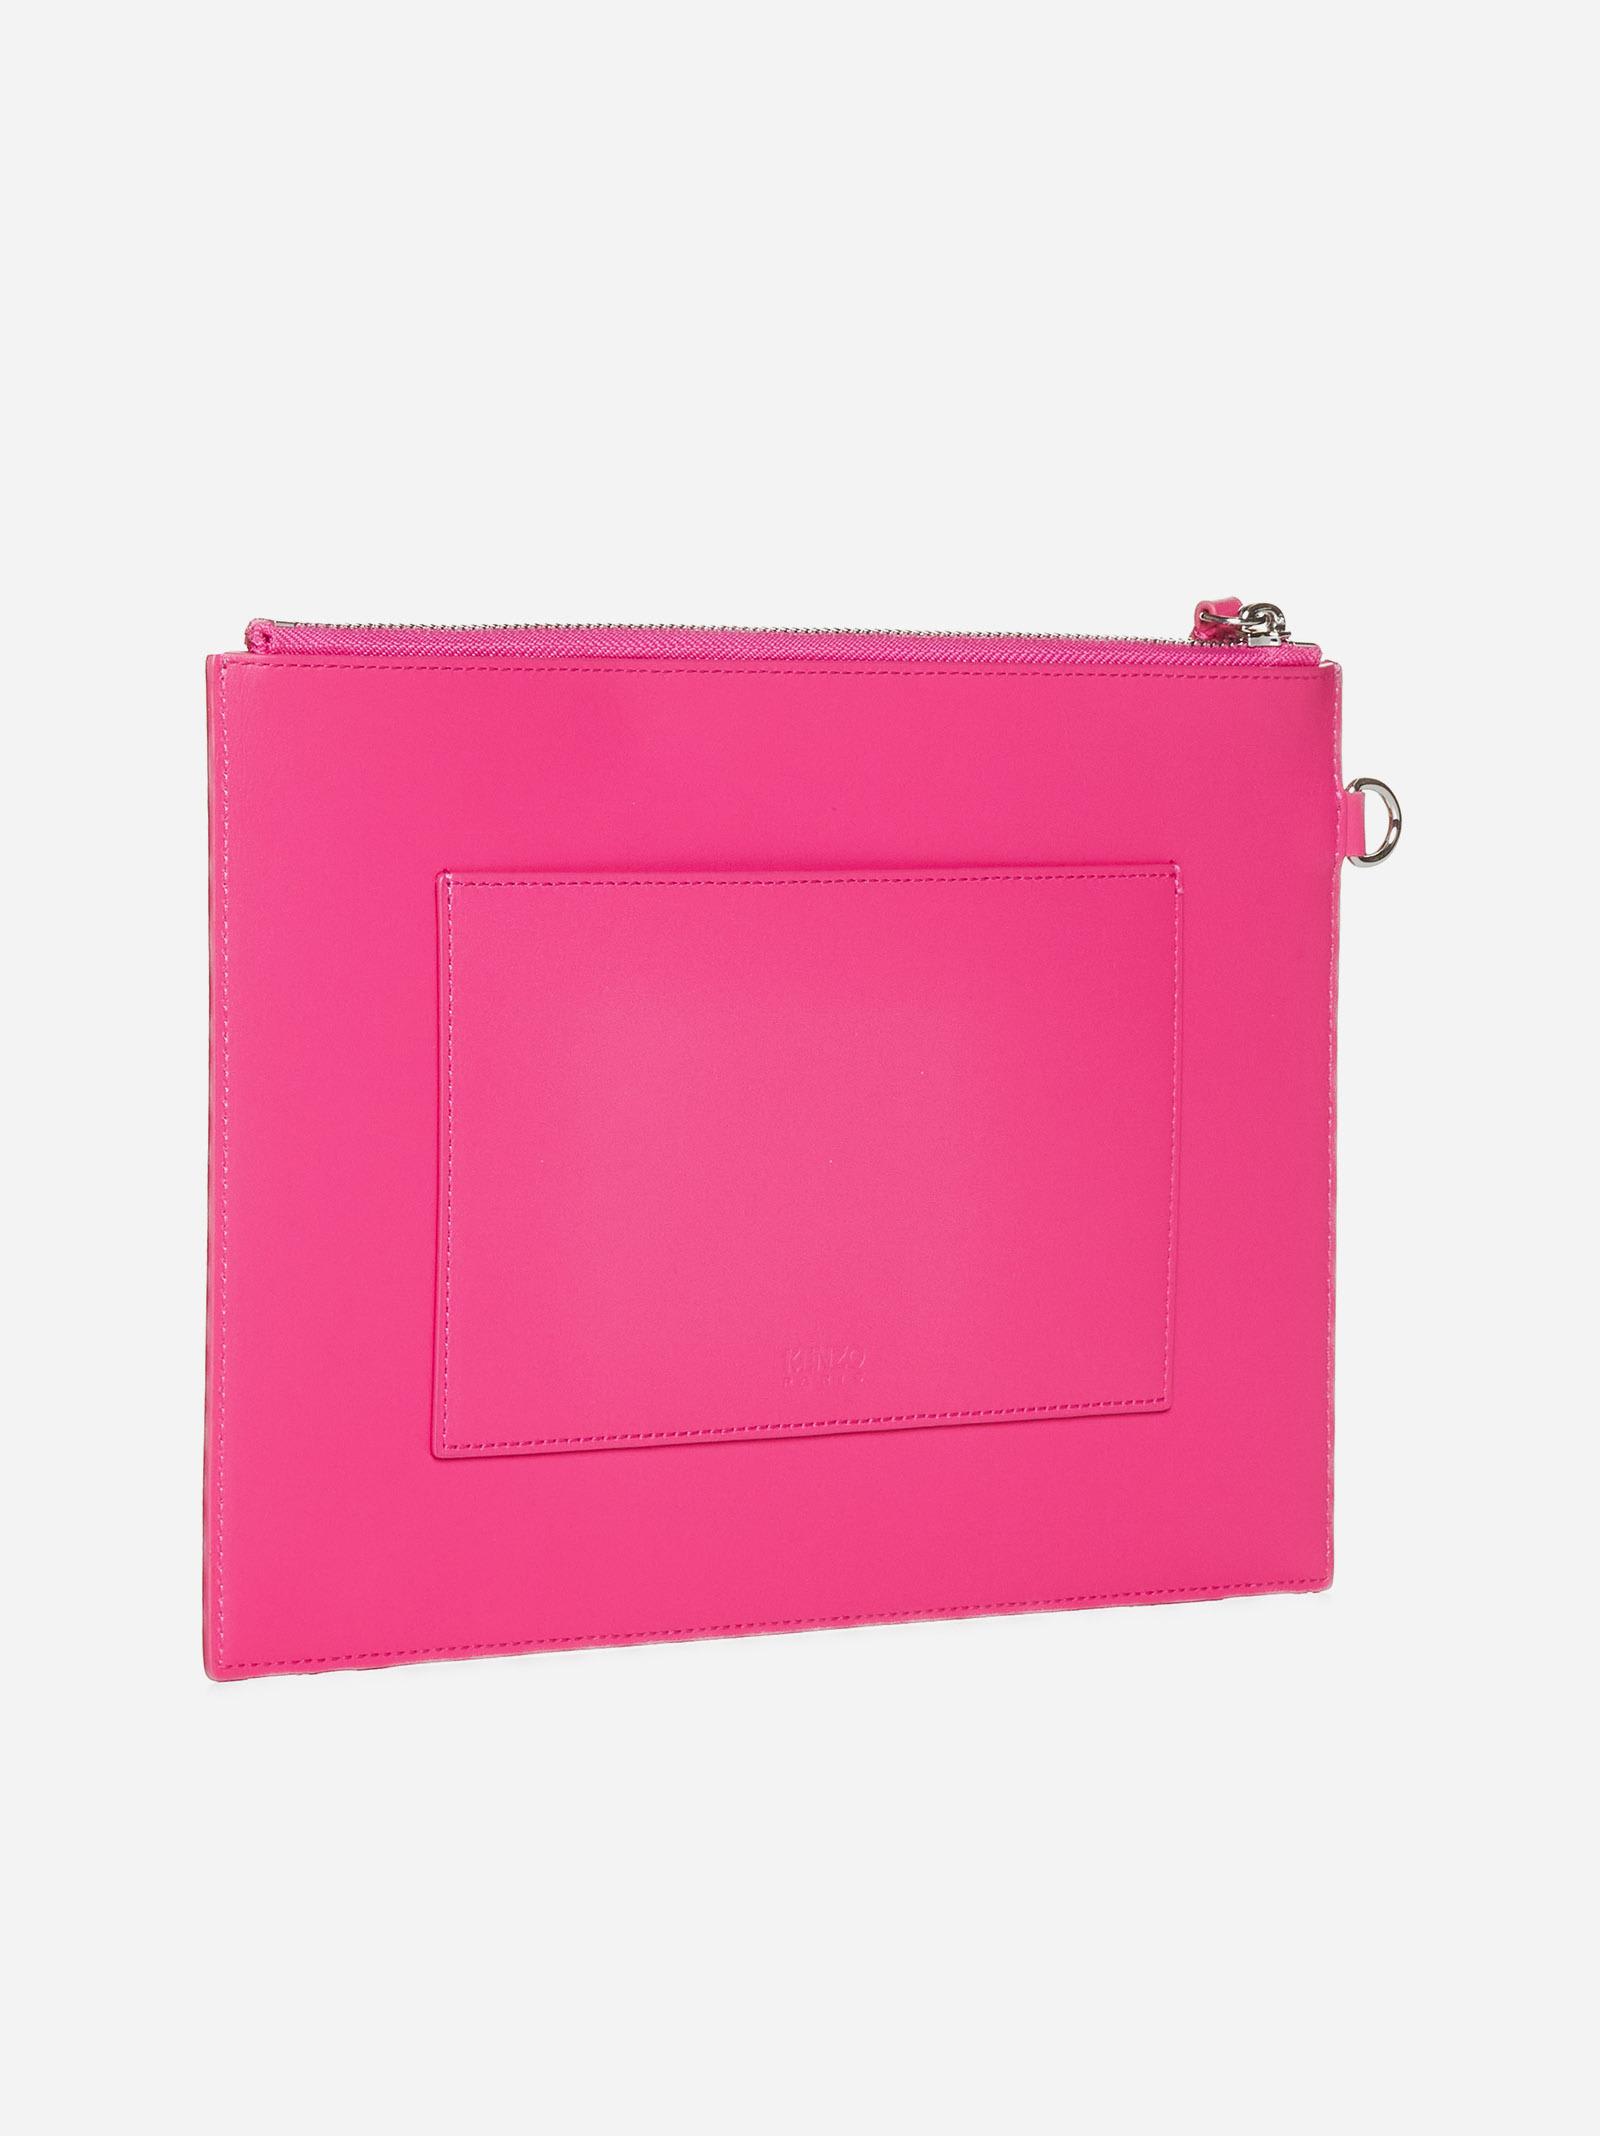 Shop Kenzo Logo Leather Large Clutch Bag In Pink